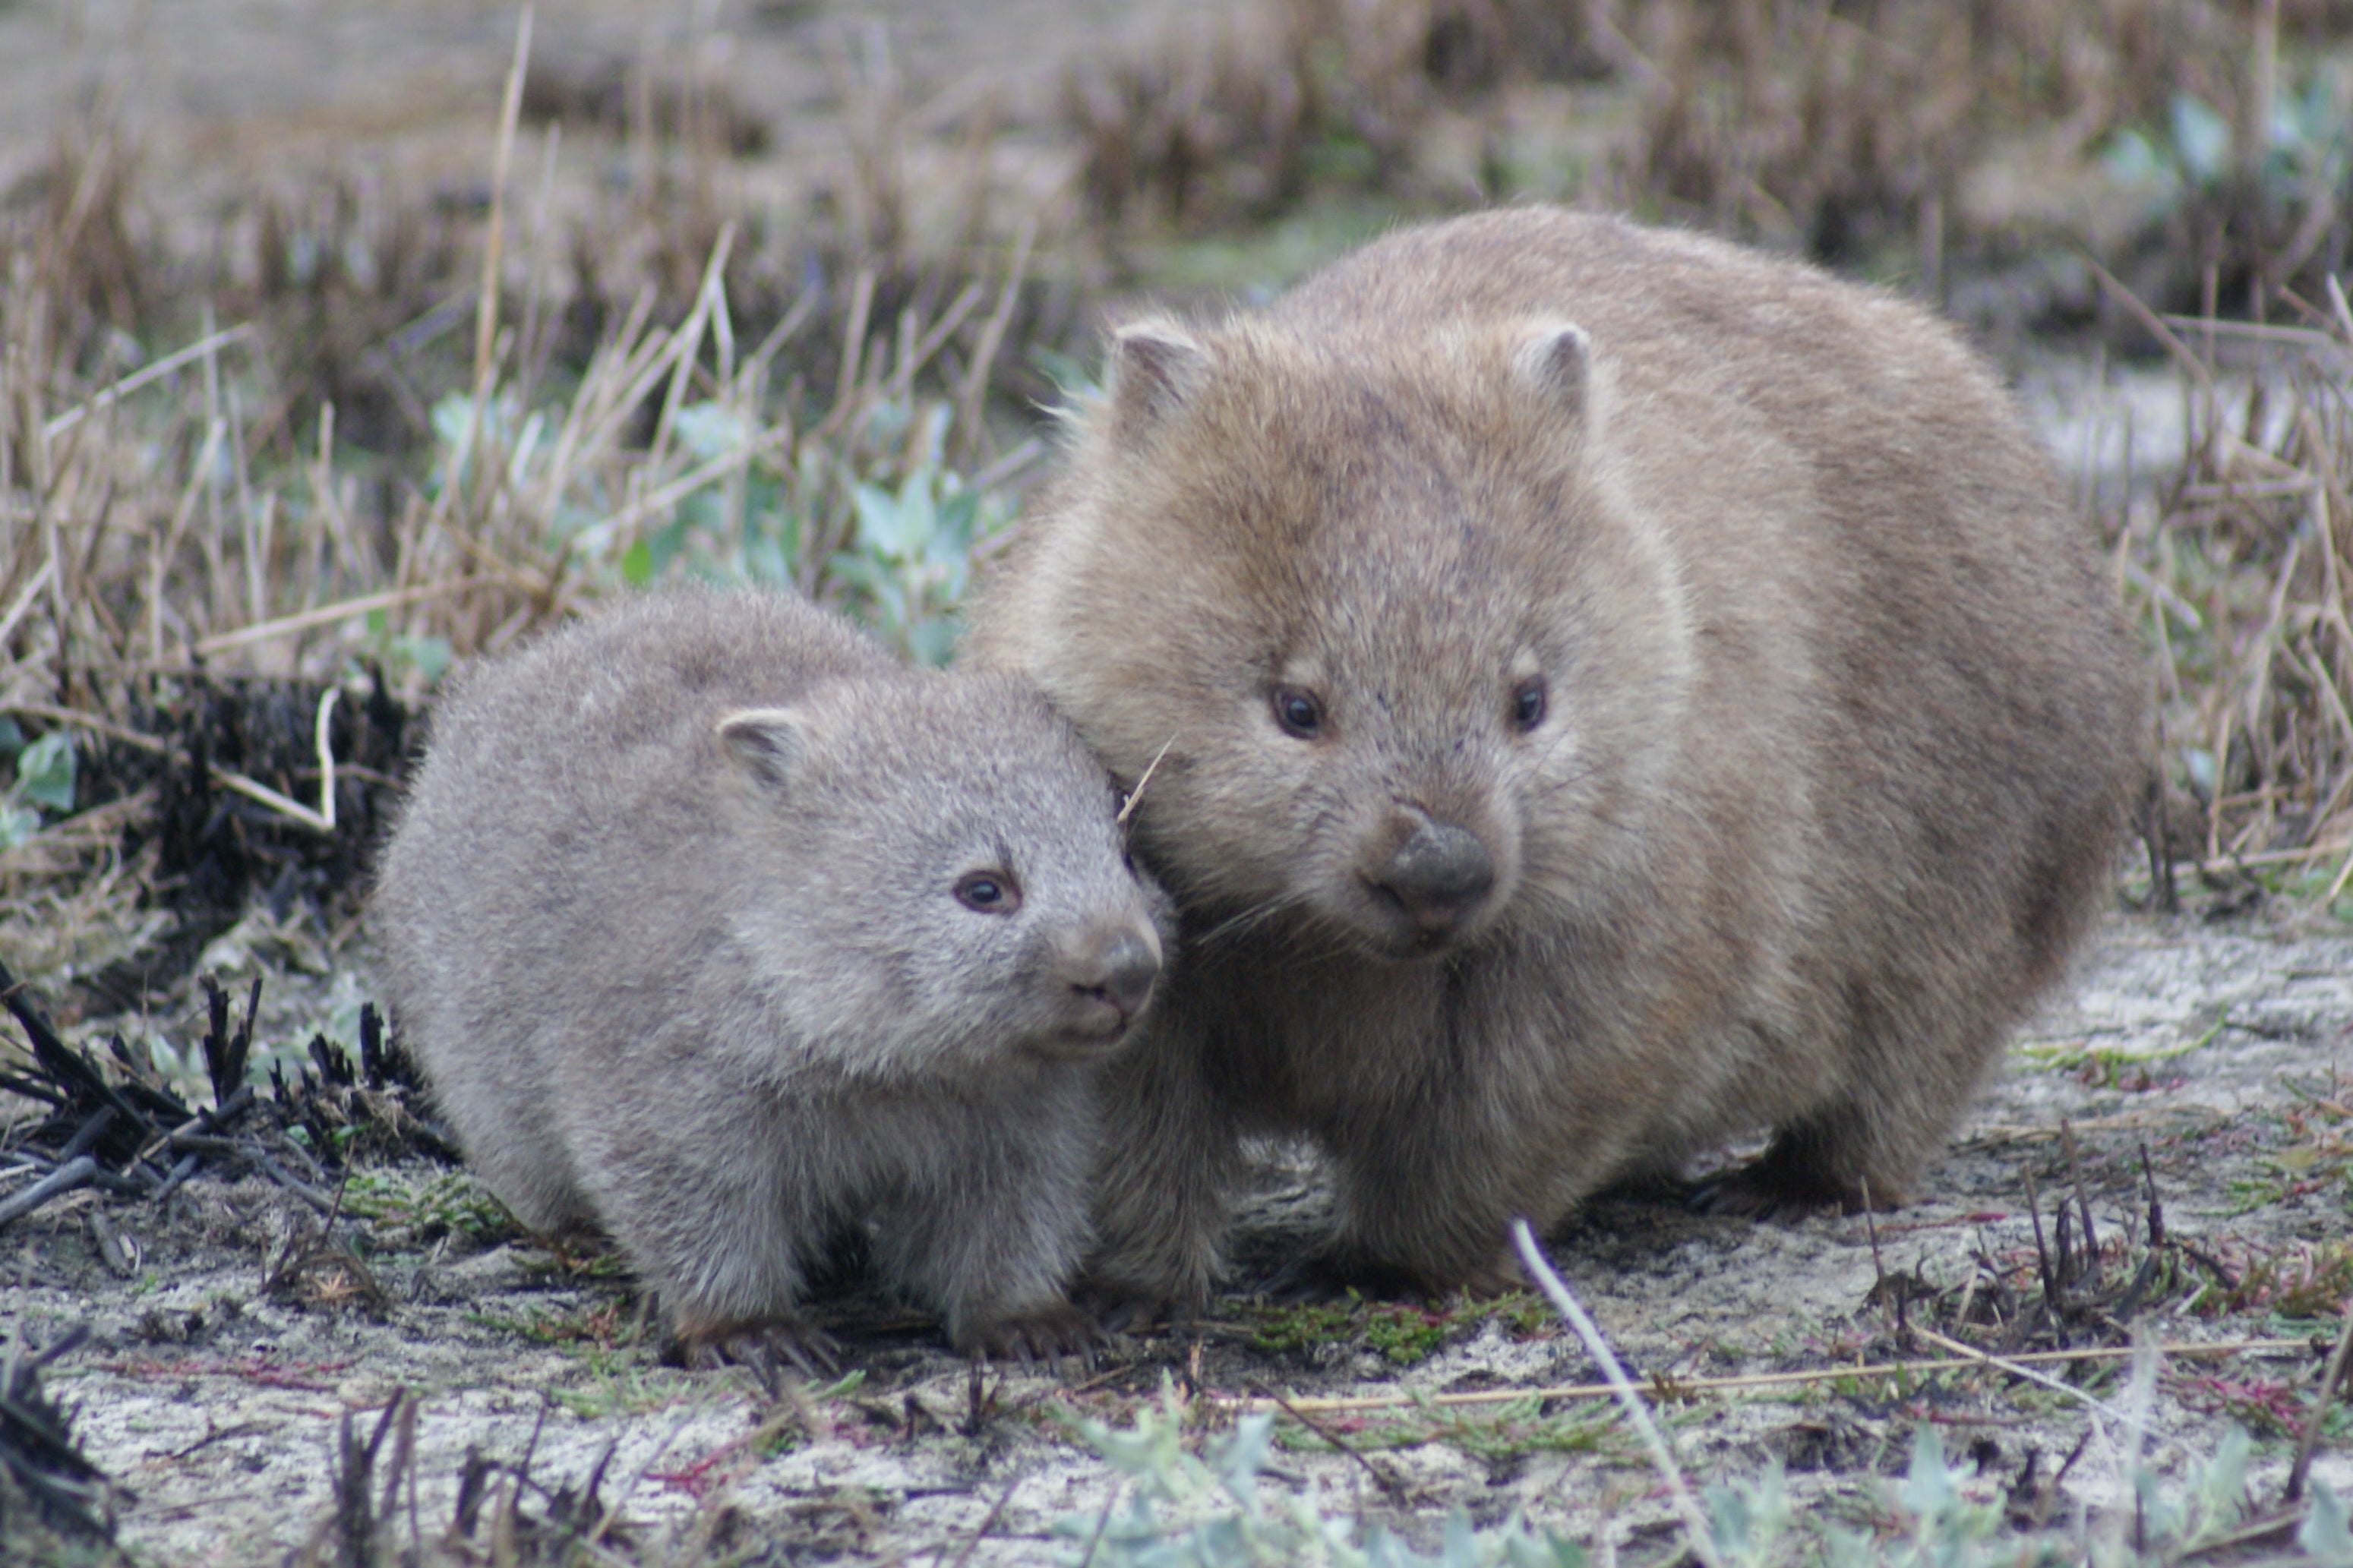 A mom and baby wombat sit close together in a field